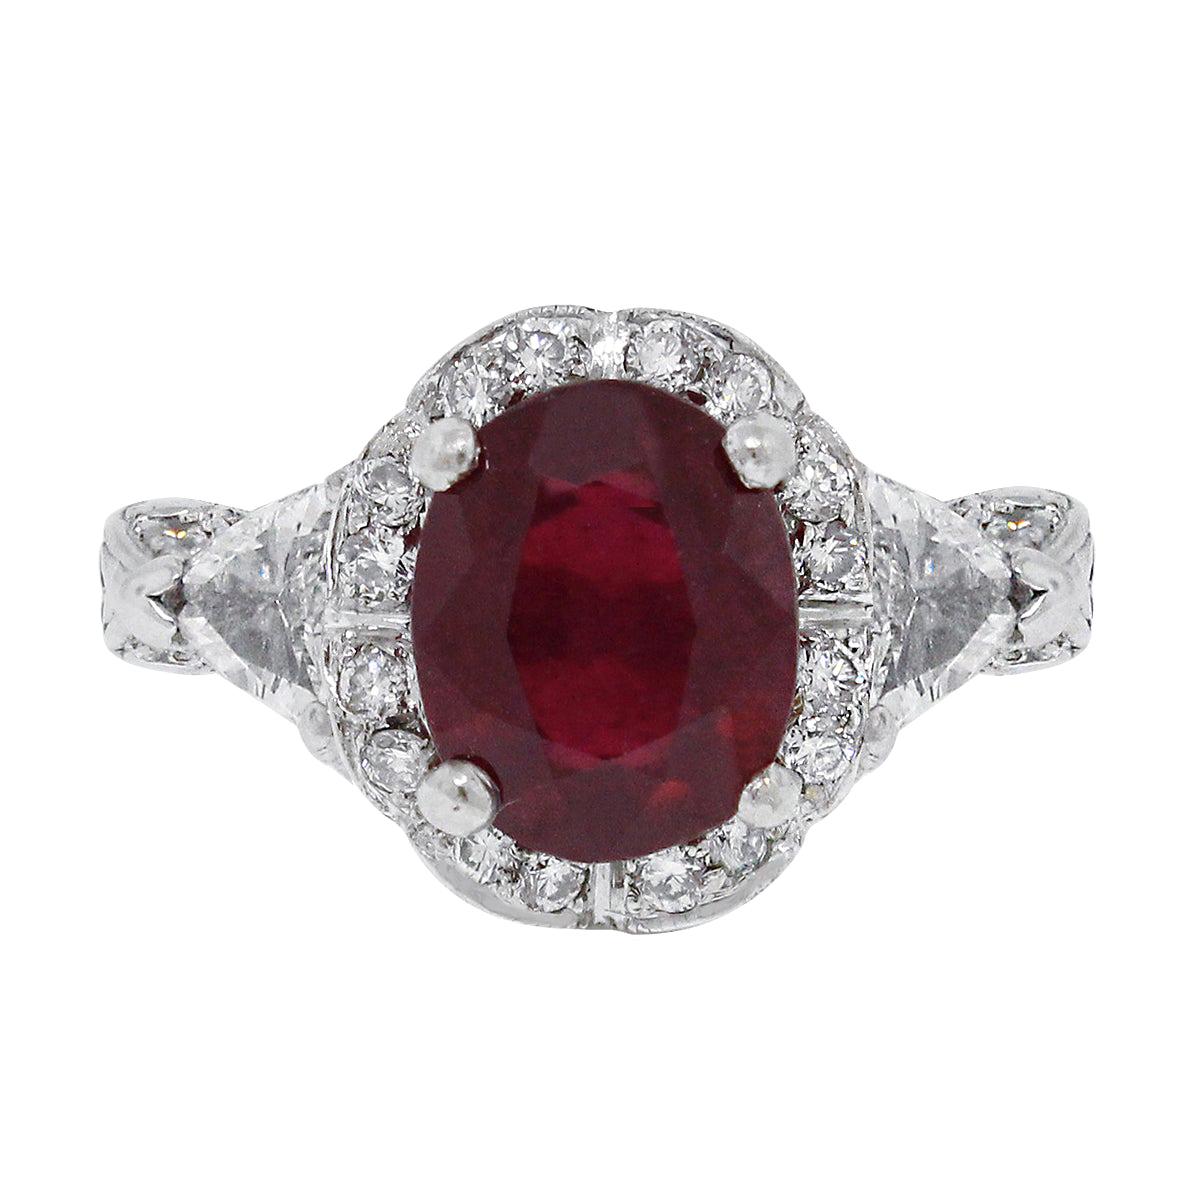 3 Carat Glass Filled Ruby Ring